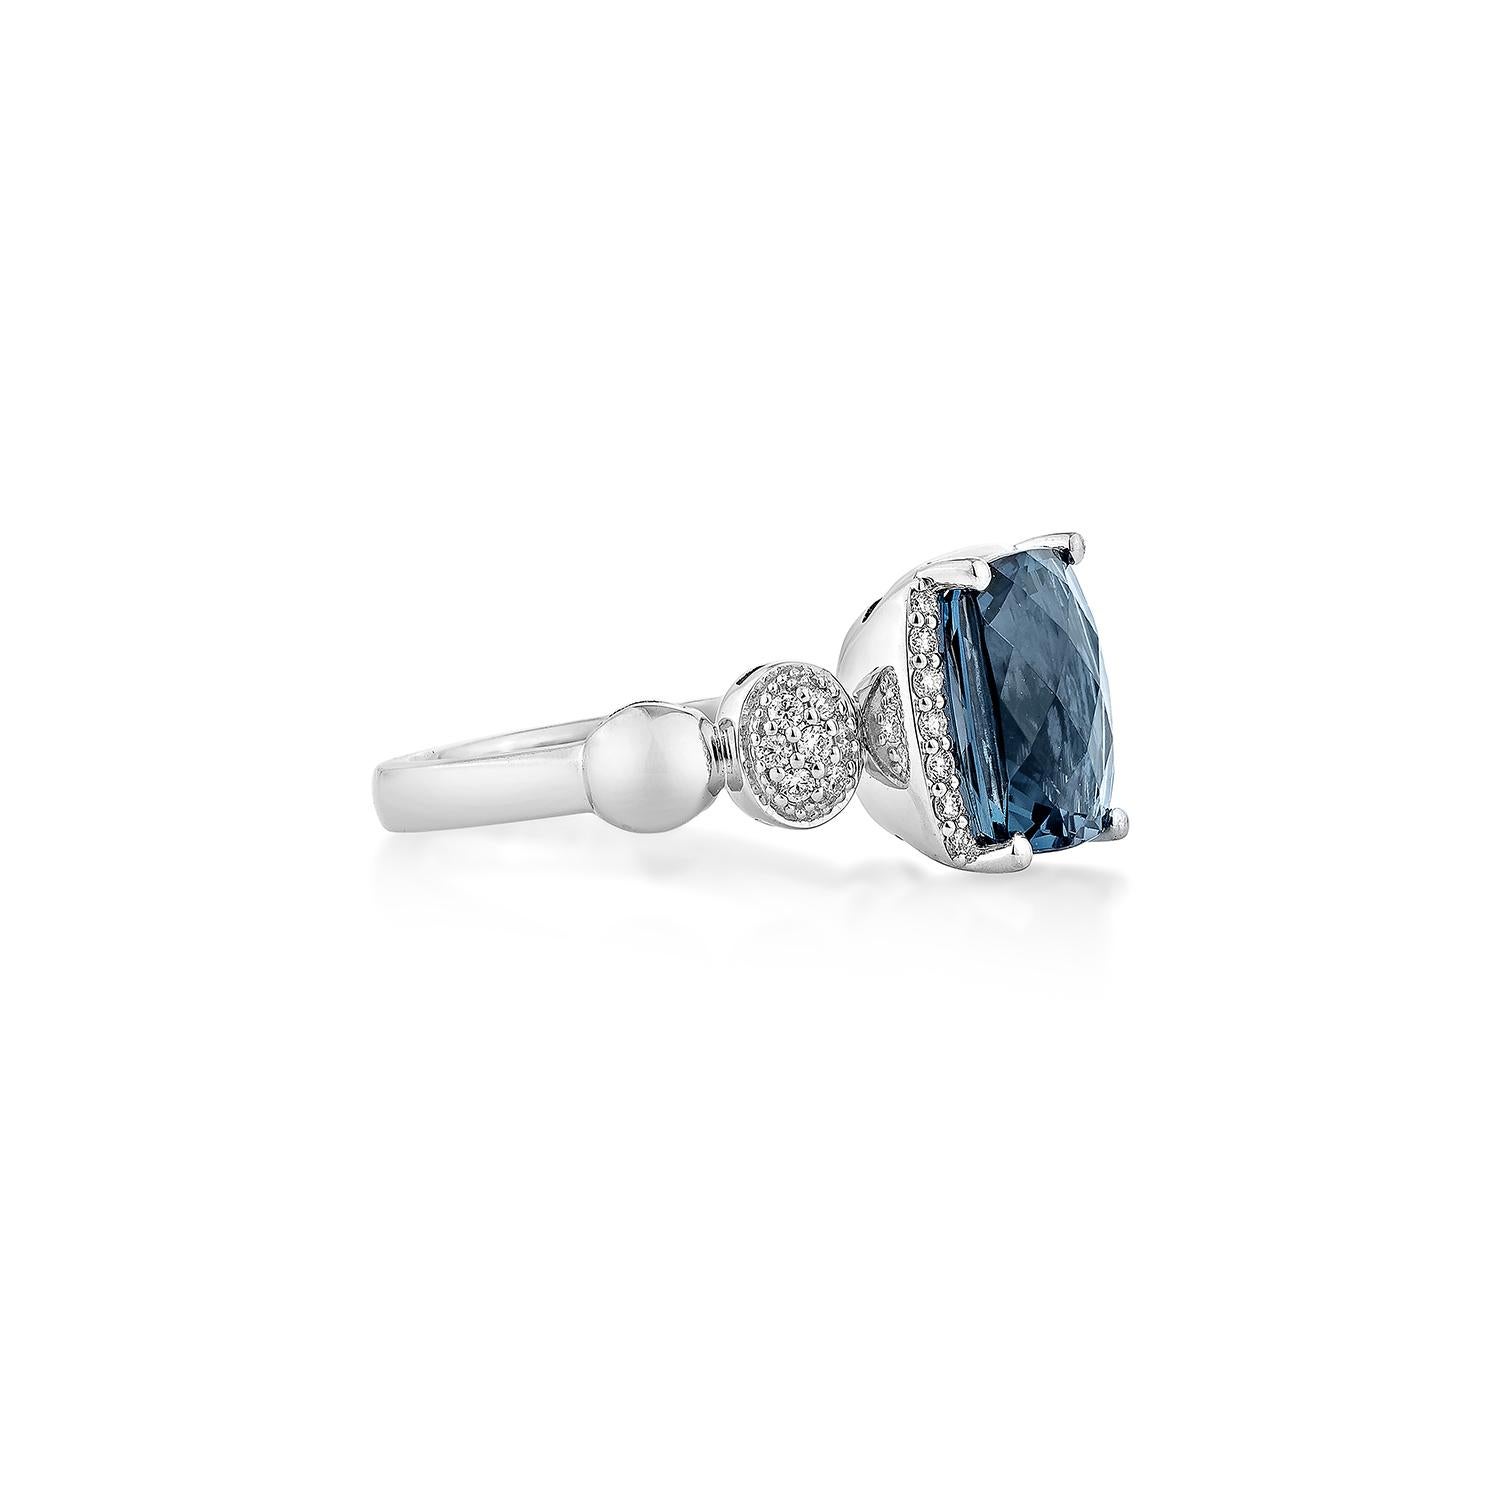 Introducing a new ring style that represents luxury, fashion, and personal flair. The collection includes antique rings adorned with beautiful gemstone London blue topaz. One standout piece is a London blue topaz ring surrounded by dazzling